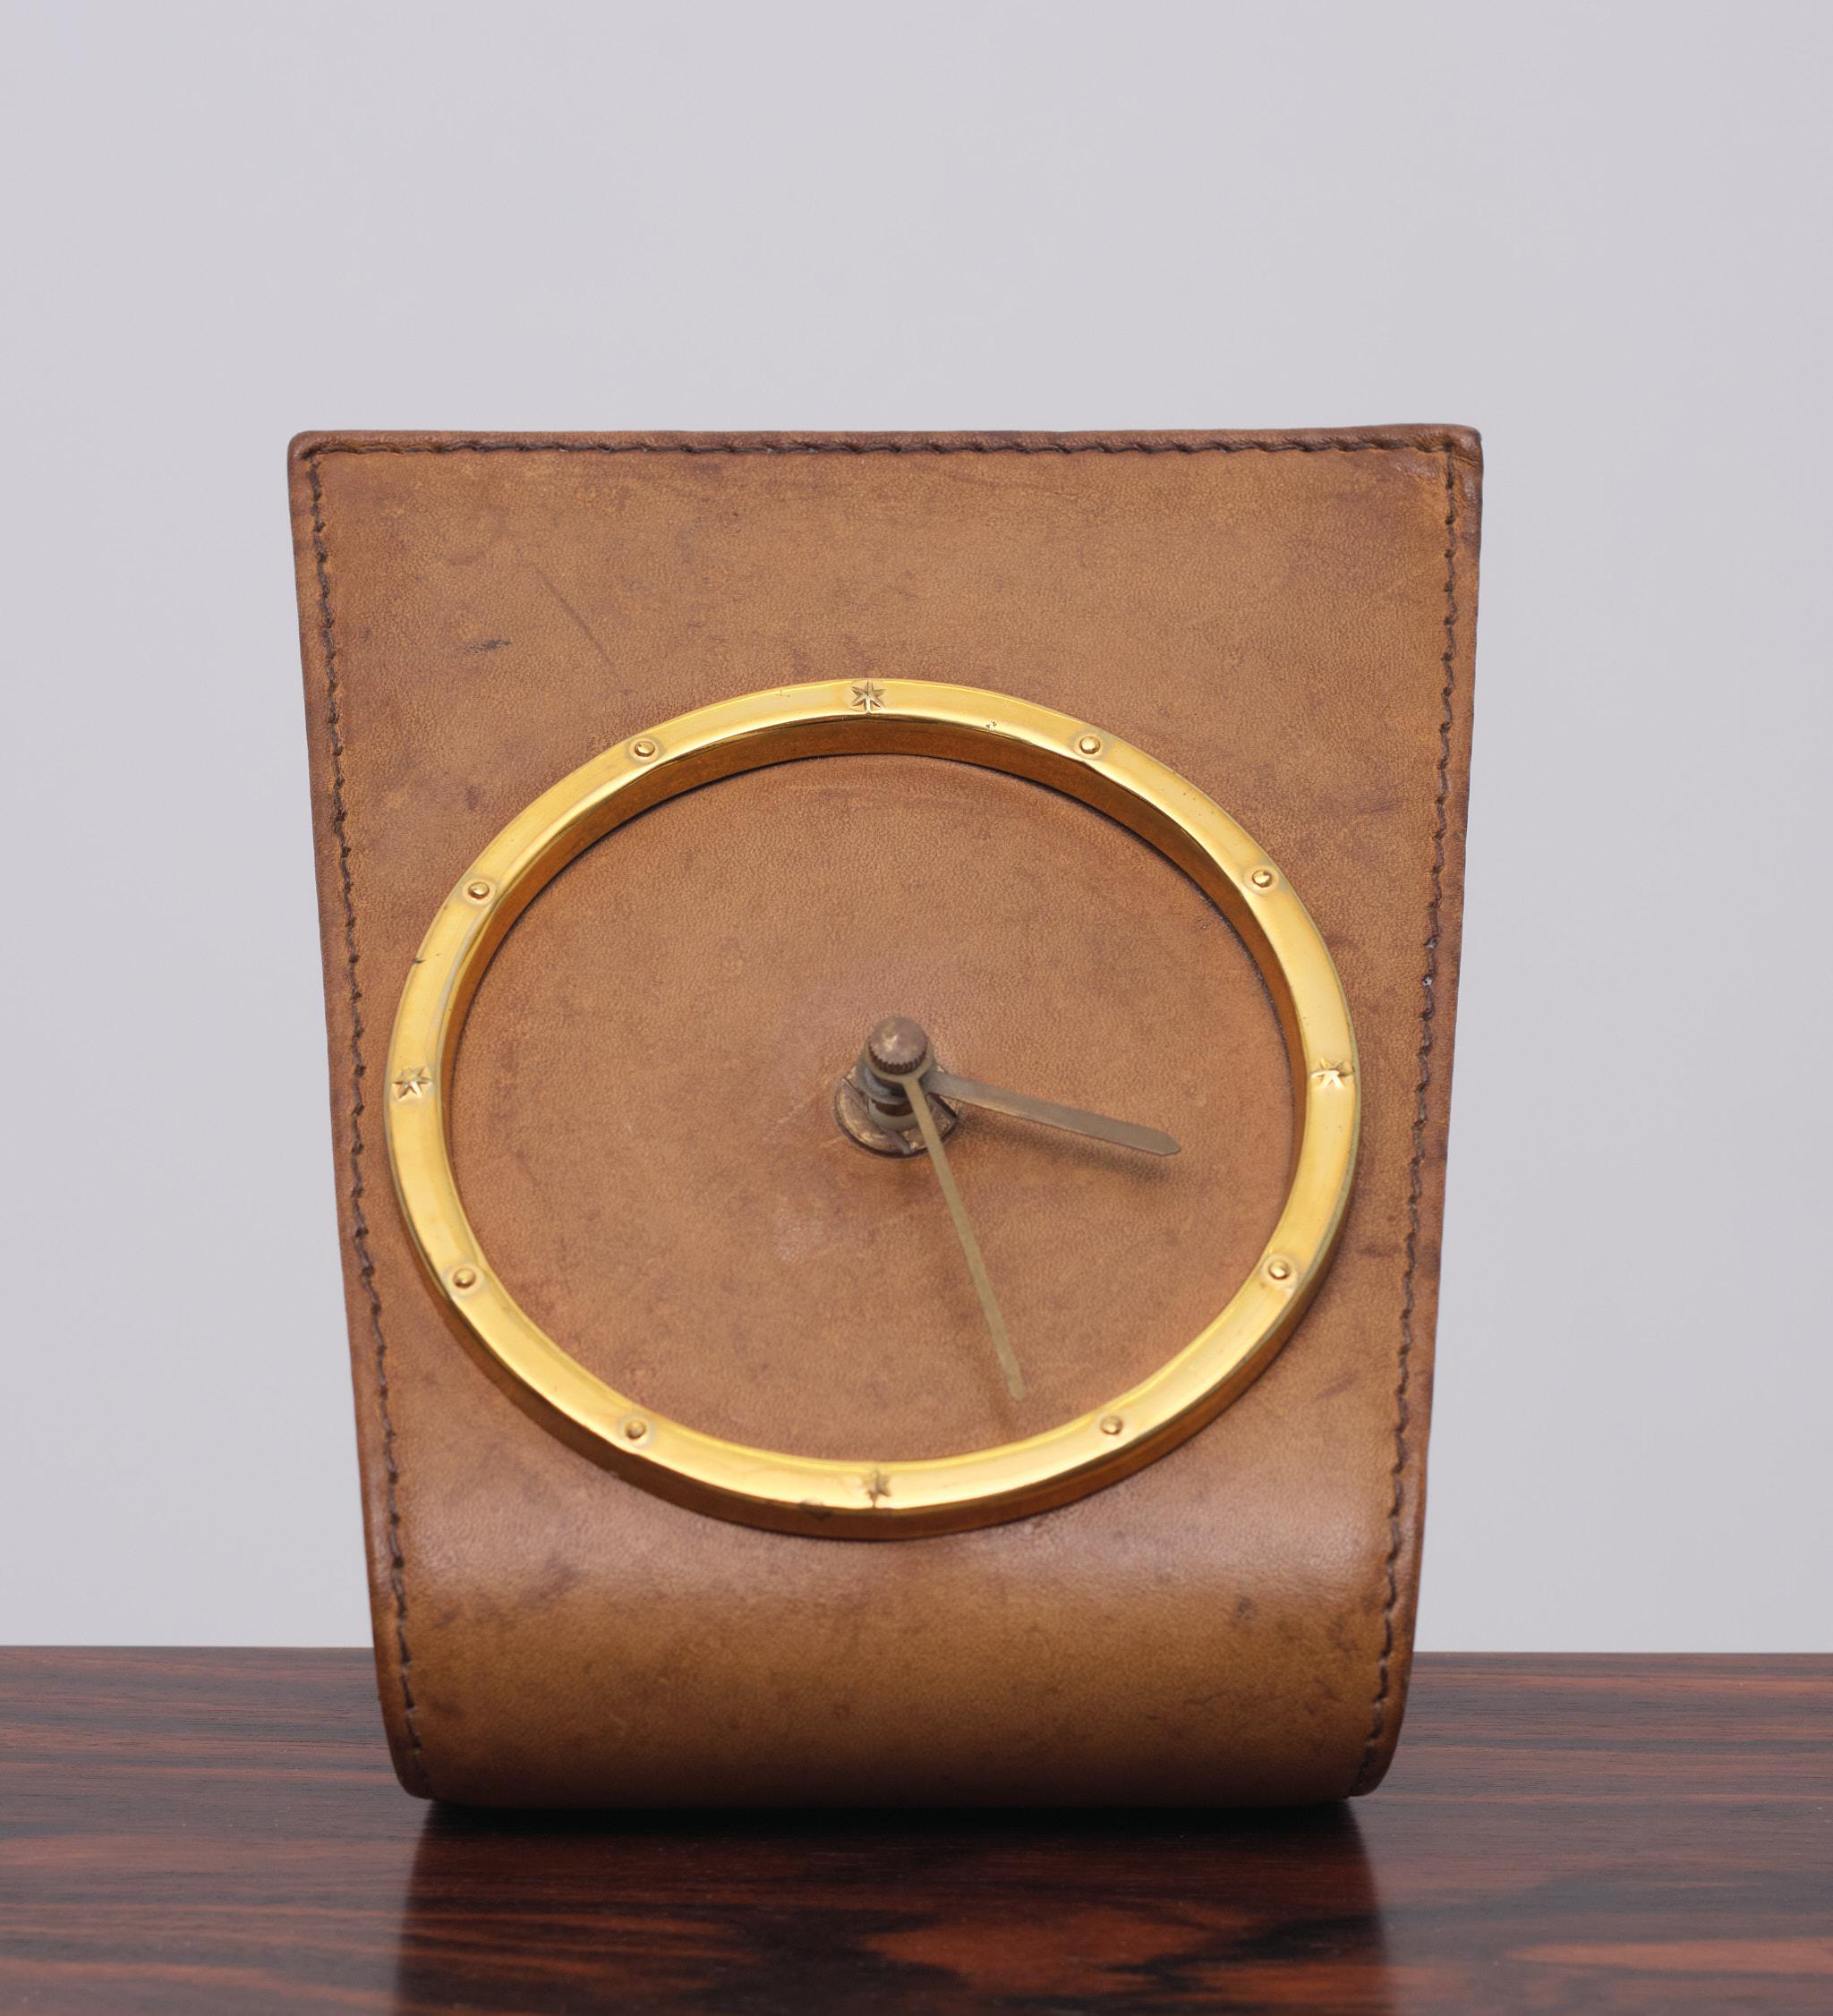 Very nice stich leather desk clock. Because its angle, Ideal to place 
on a Desk ore a low table. Comes with a quarts Junghans timepiece.
In a beautiful Cognac color.
   